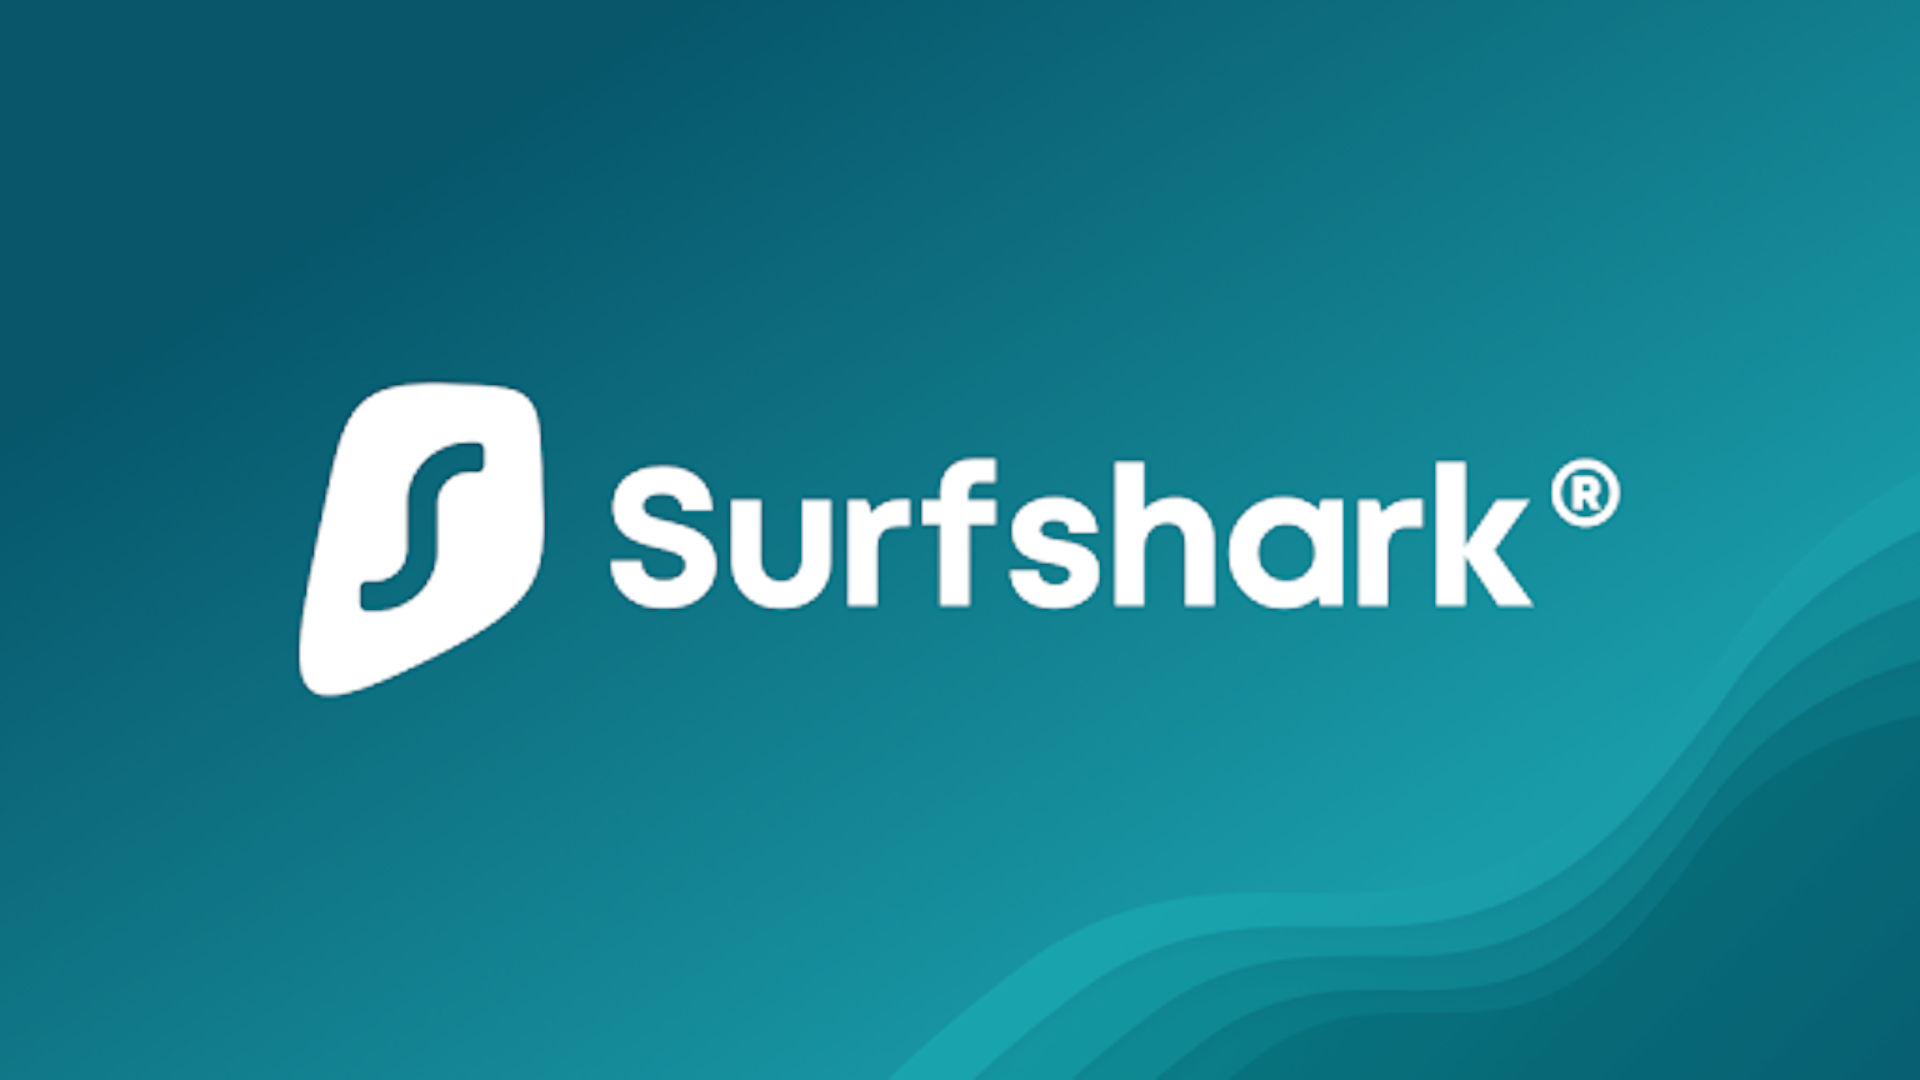 Best VPN for Android: Surfshark. Image shows the company logo.